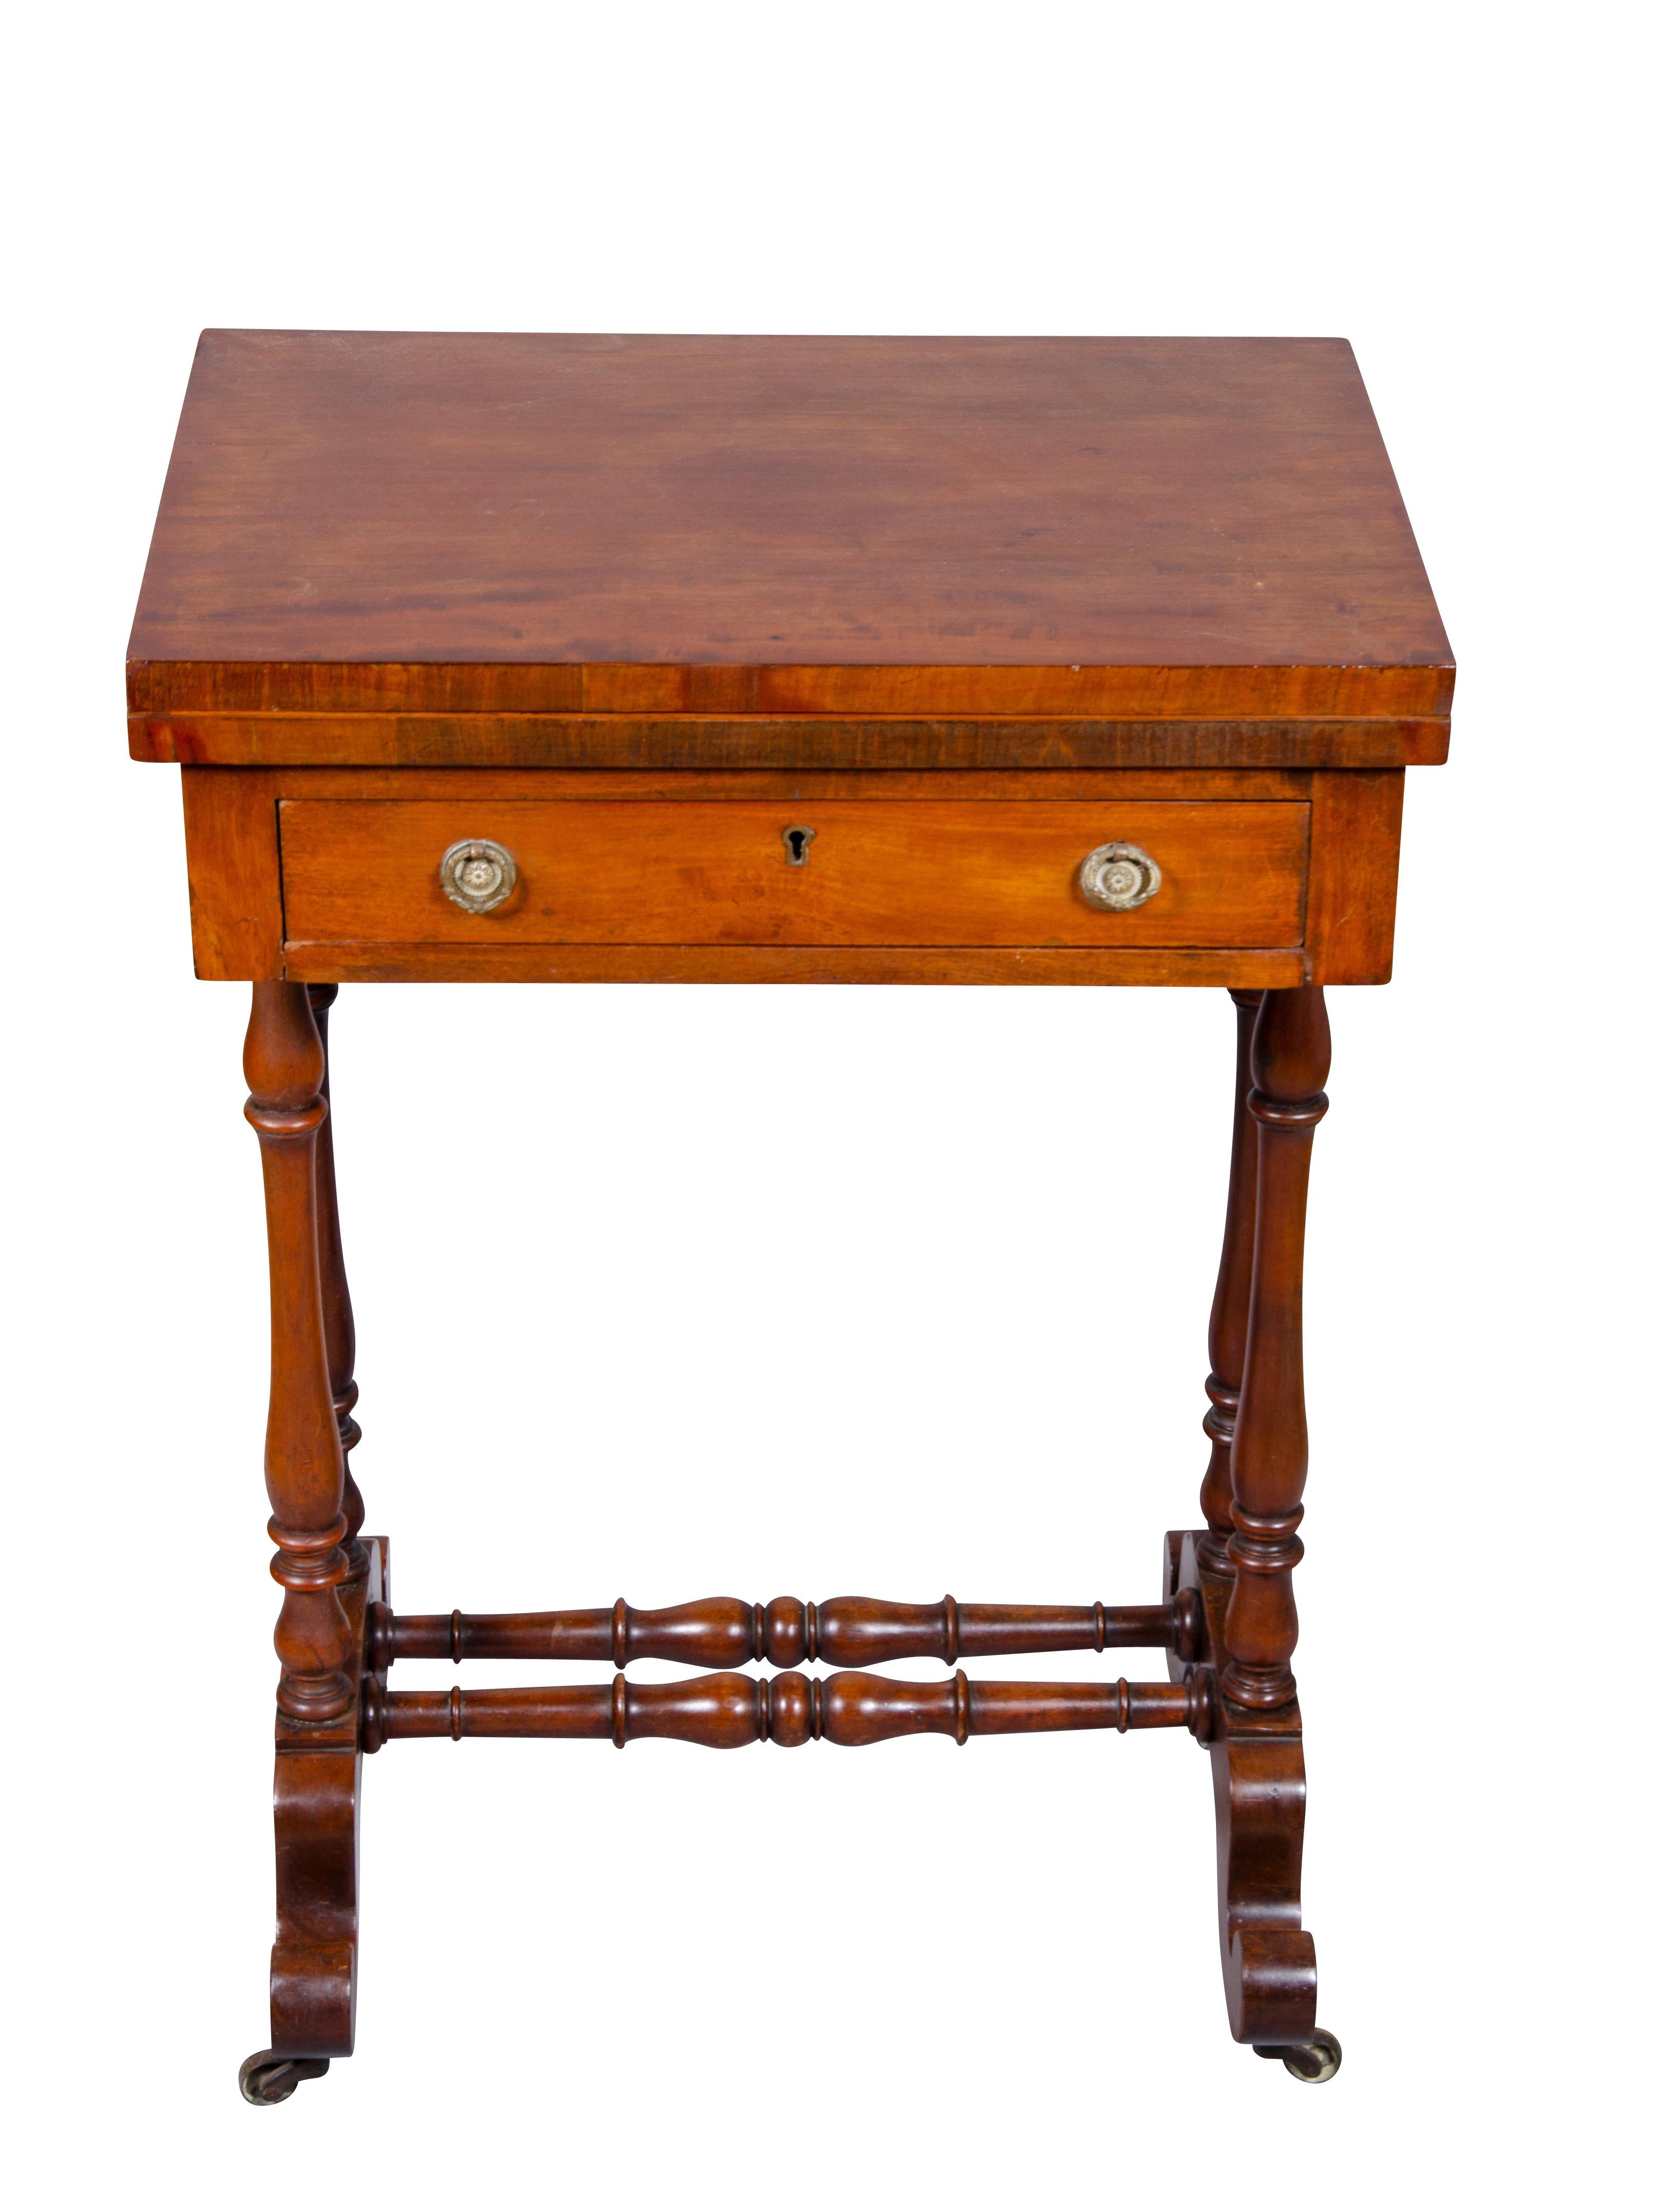 Late Regency Mahogany Games Table In Good Condition For Sale In Essex, MA